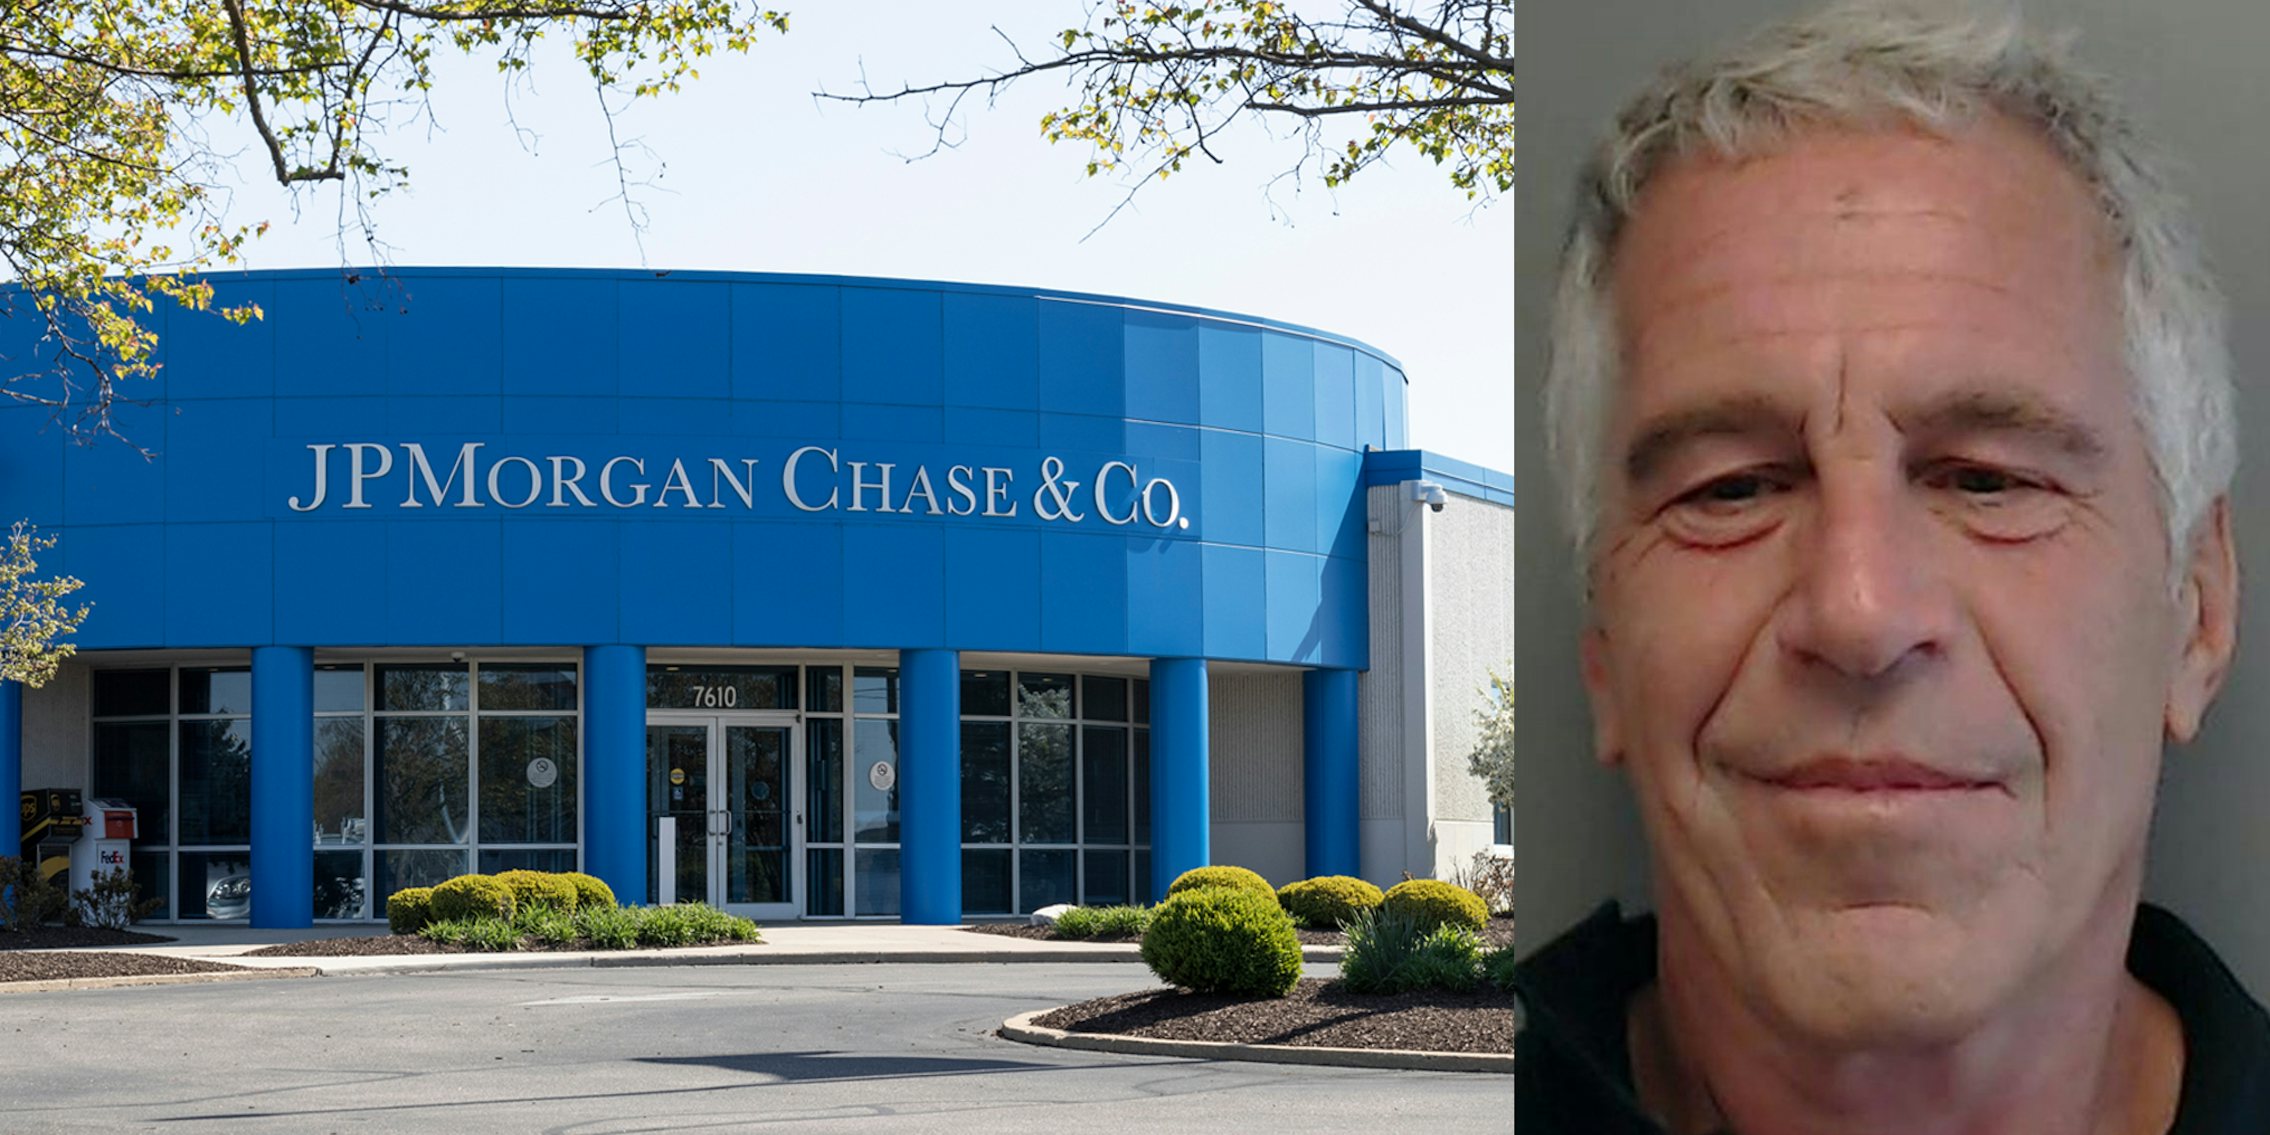 JPMorgan Chase & Co. bank building with sign (l) Jeffrey Epstein in front of grey background (r)